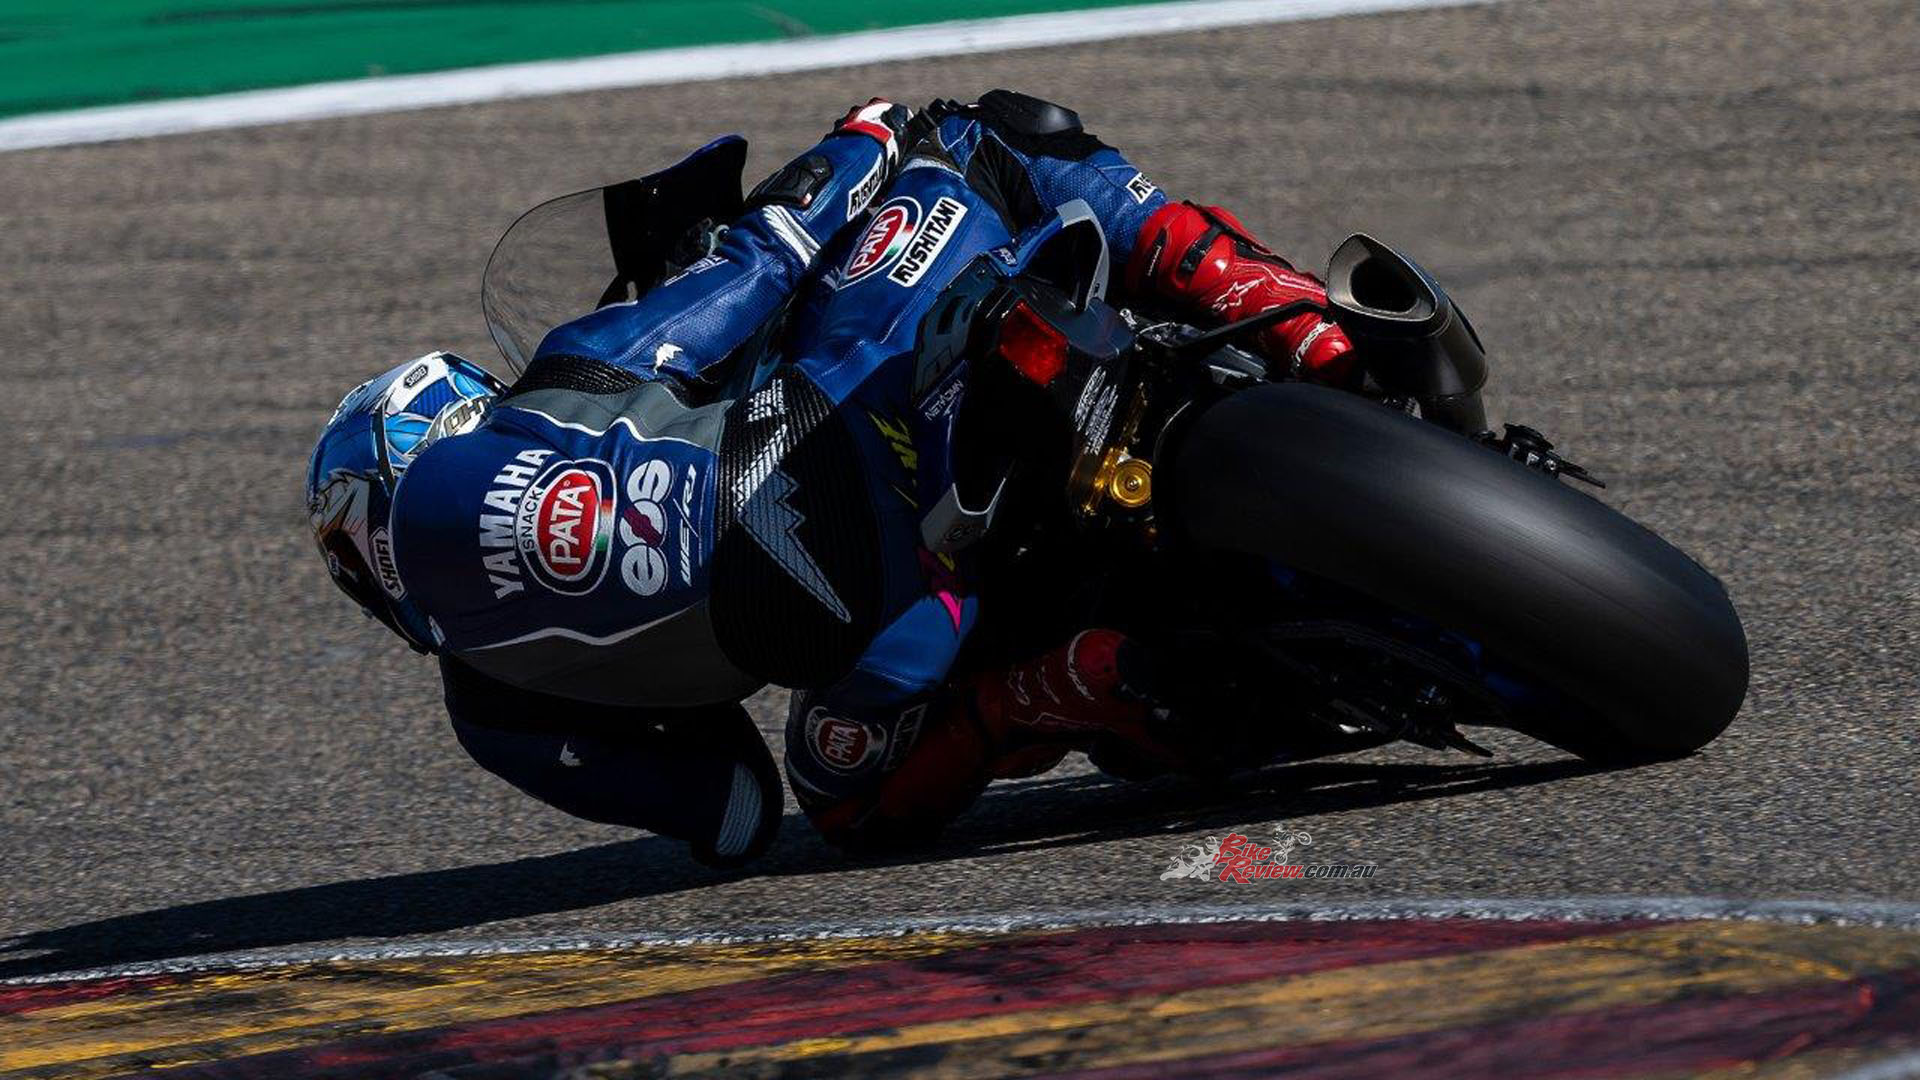 Yamaha test mechanical components and chase acceleration improvements at the Aragon test.